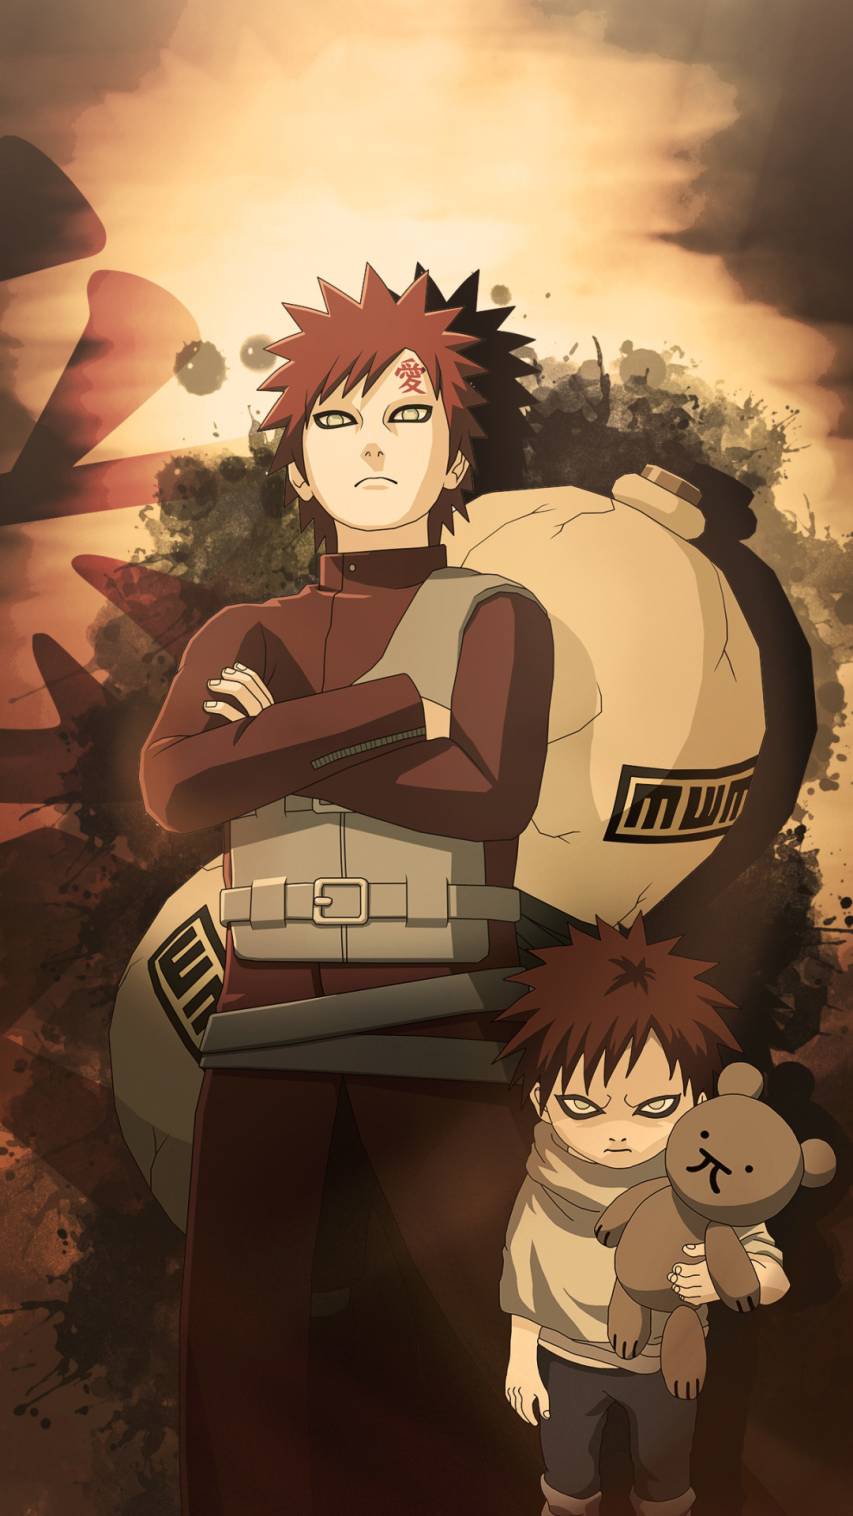 Cool Gaara Chibi Background Pictures for iPhone